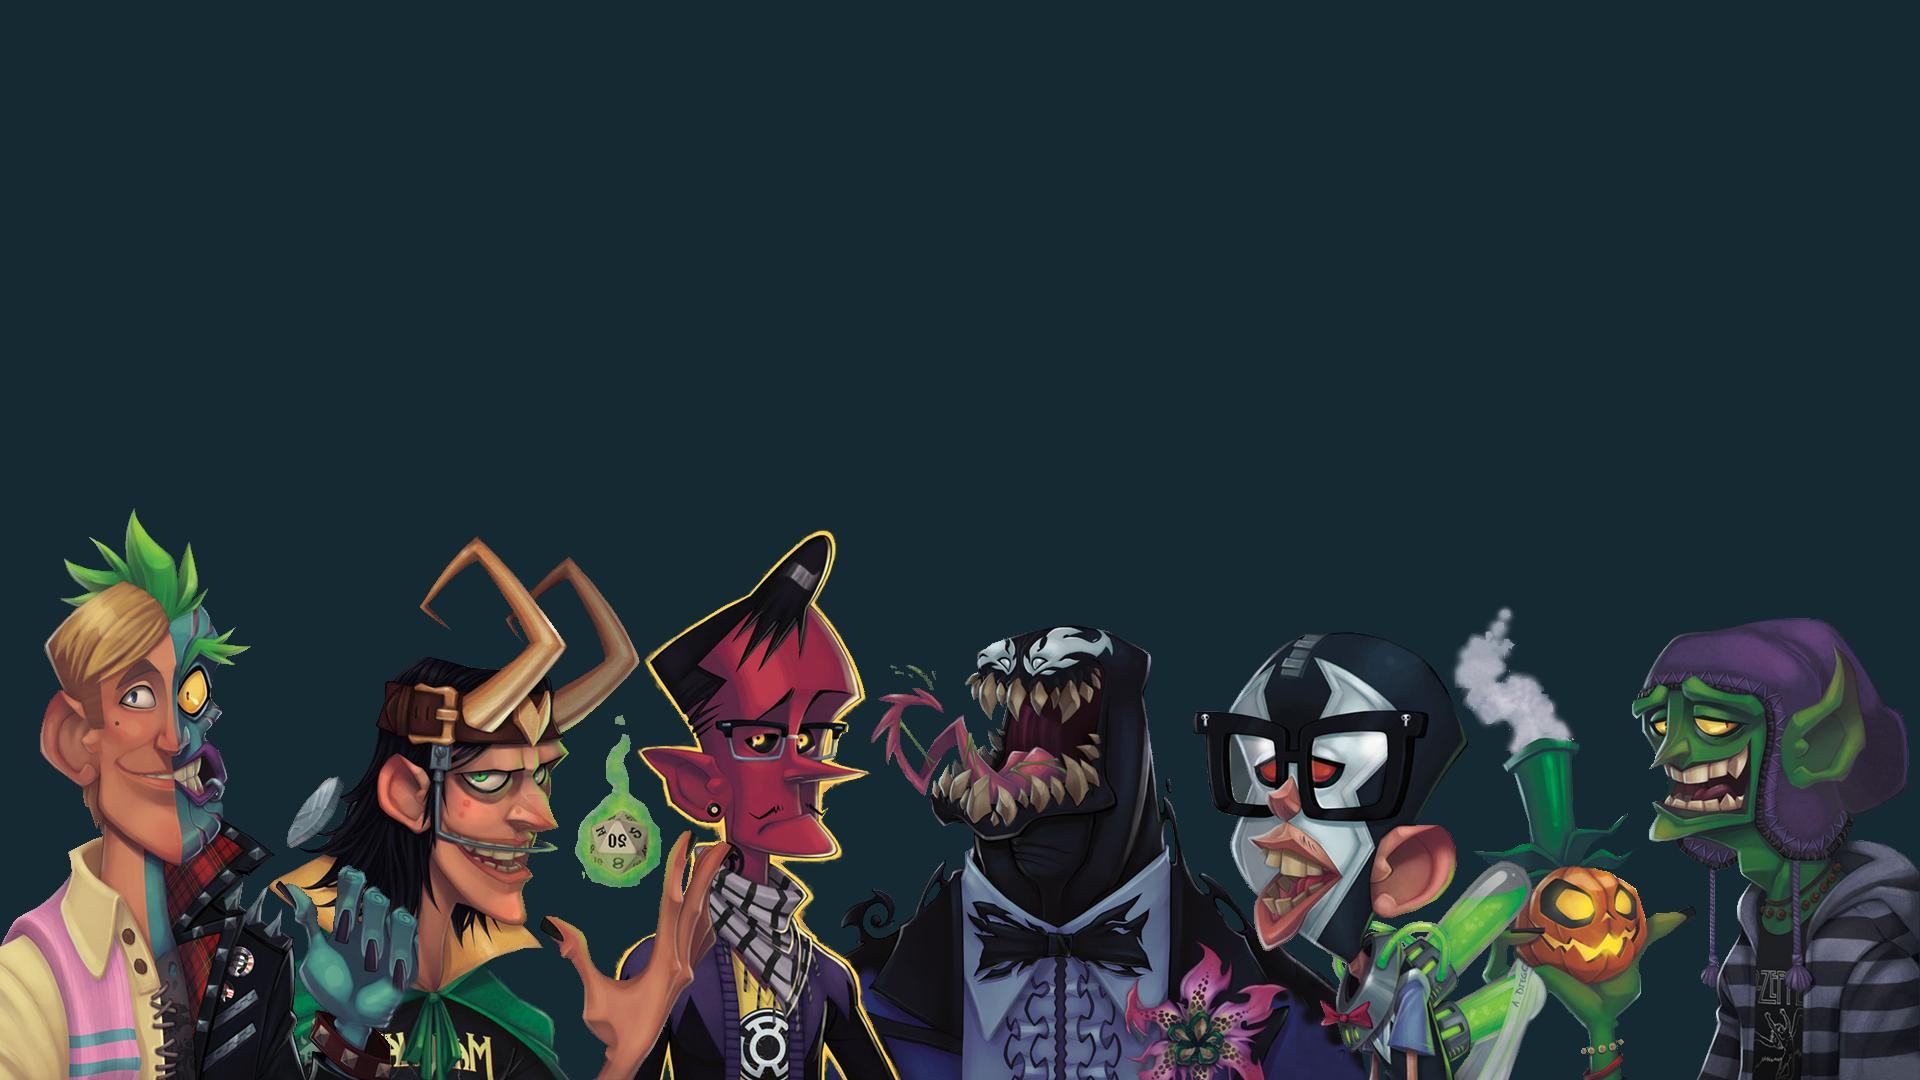 Download Free Wallpapers Backgrounds   Supervillain Yearbook 1920x1080